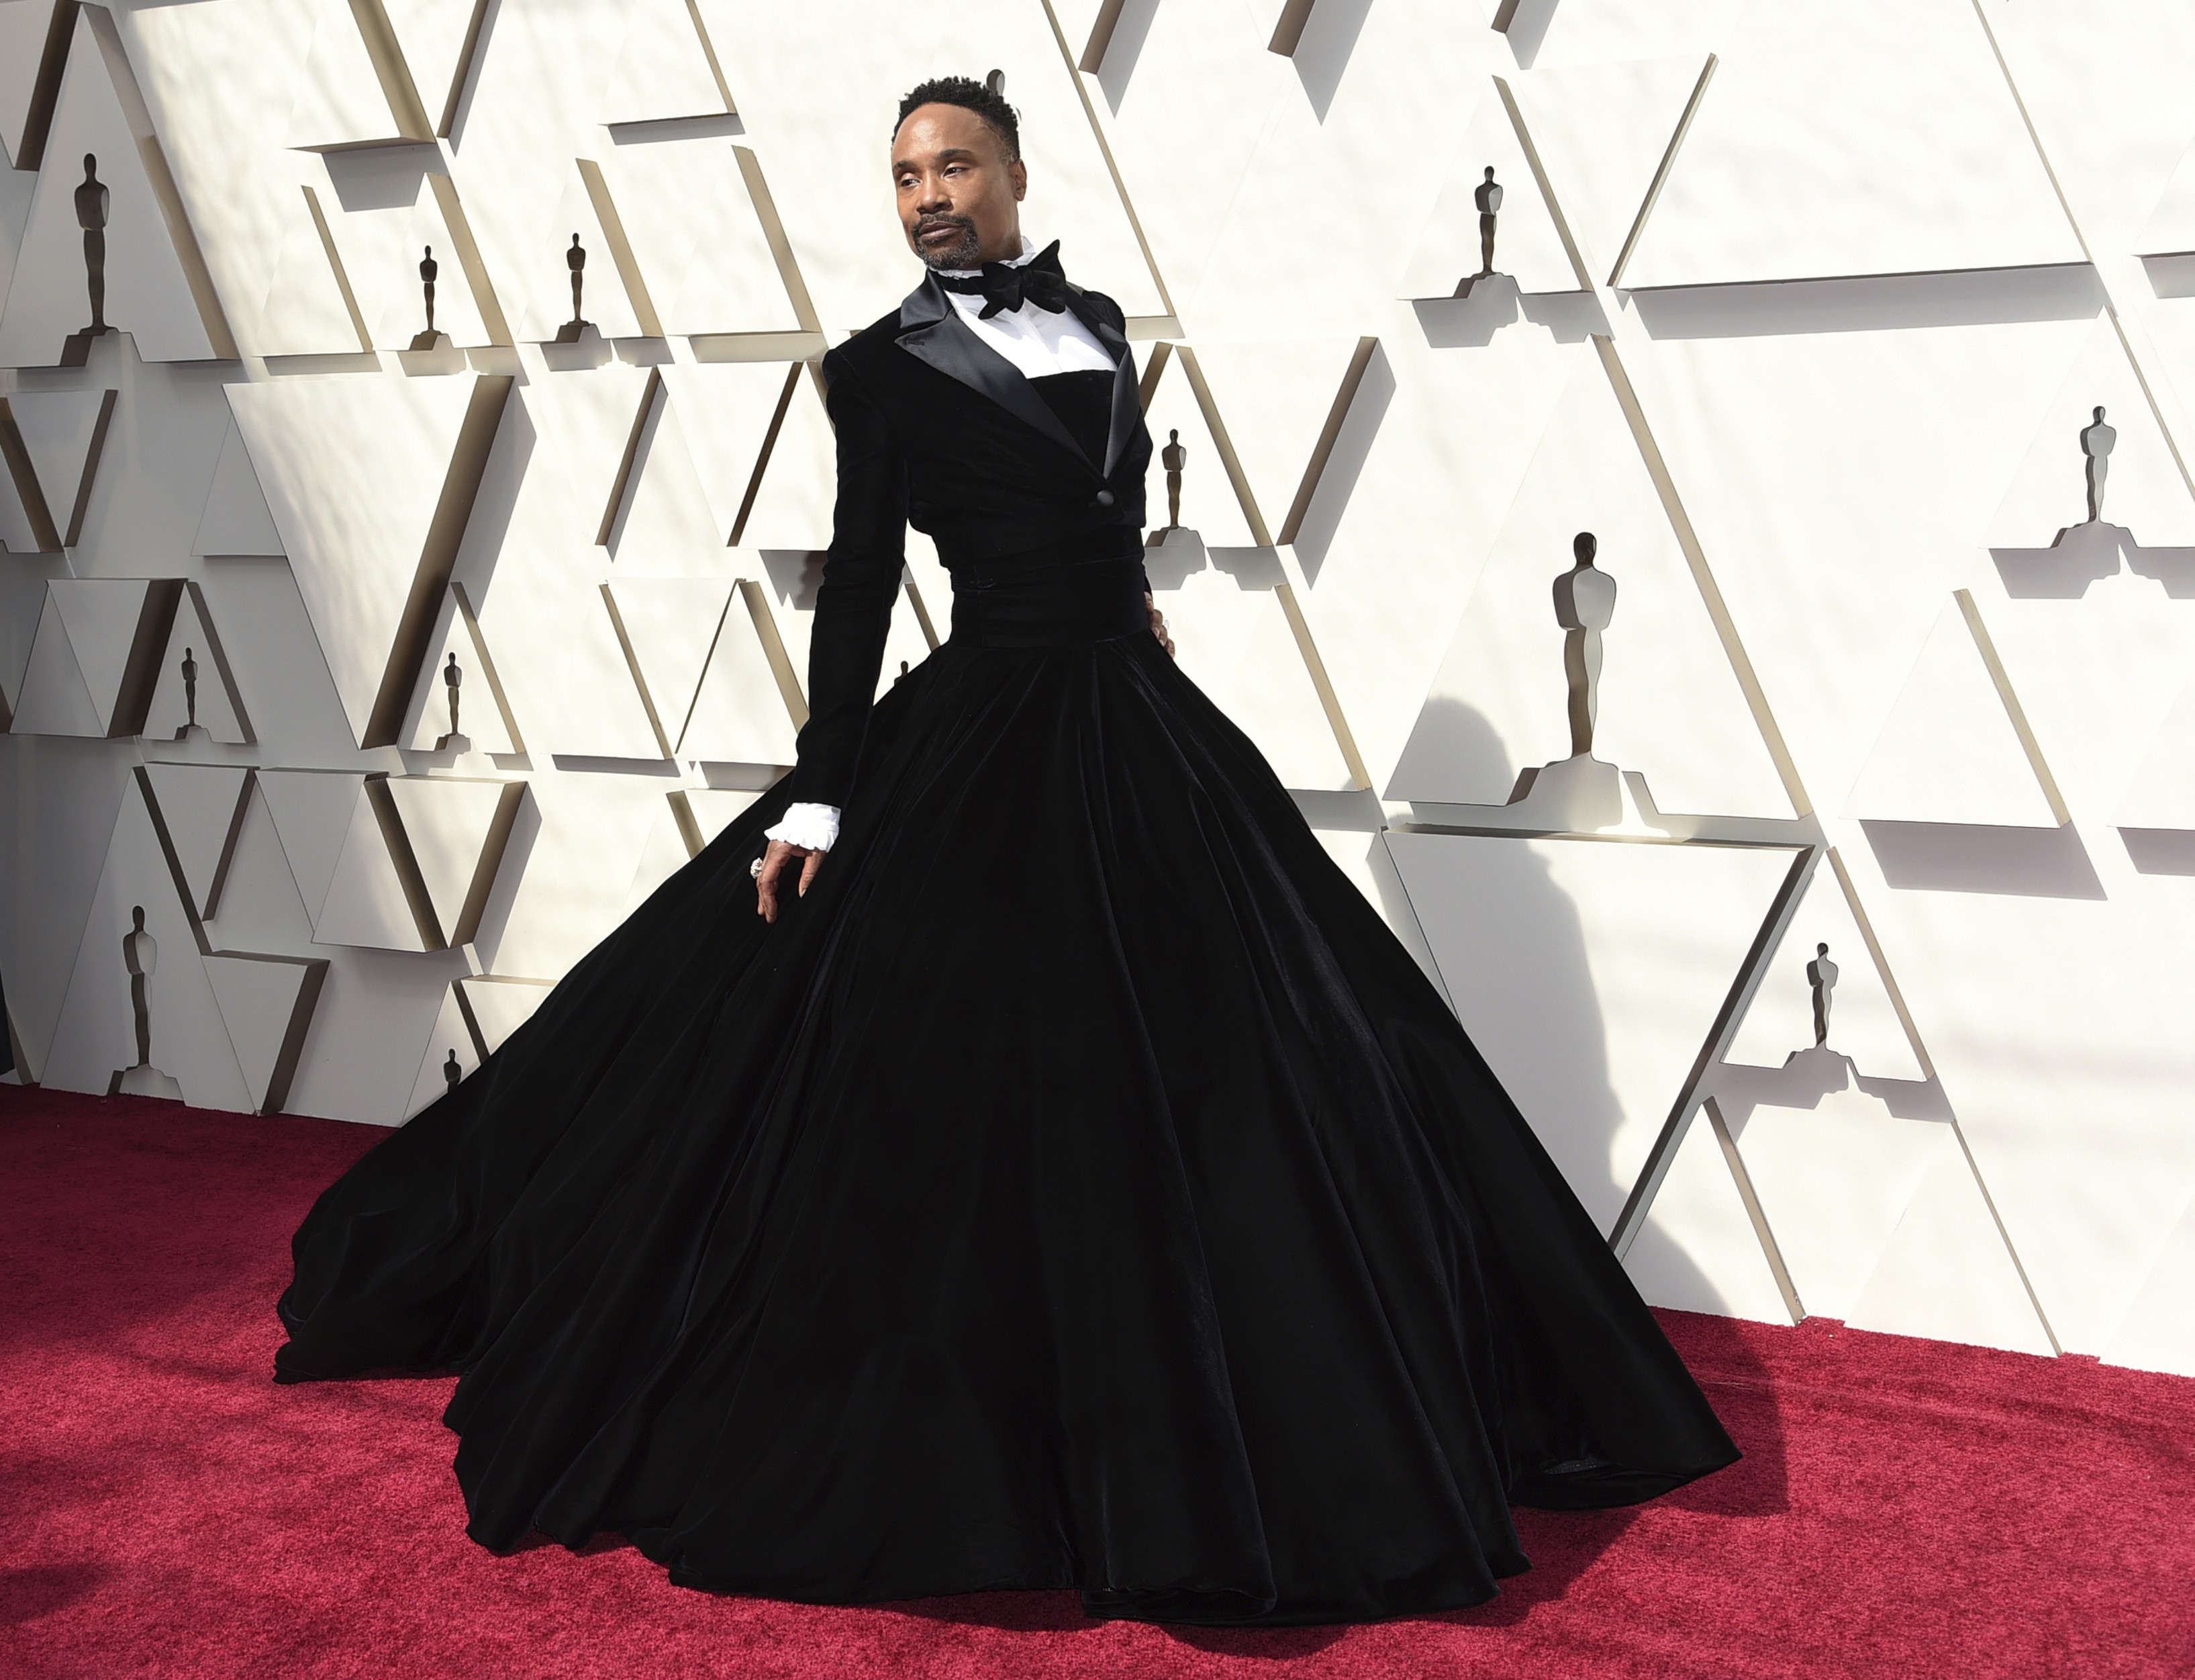 worst dressed at the oscars 2019